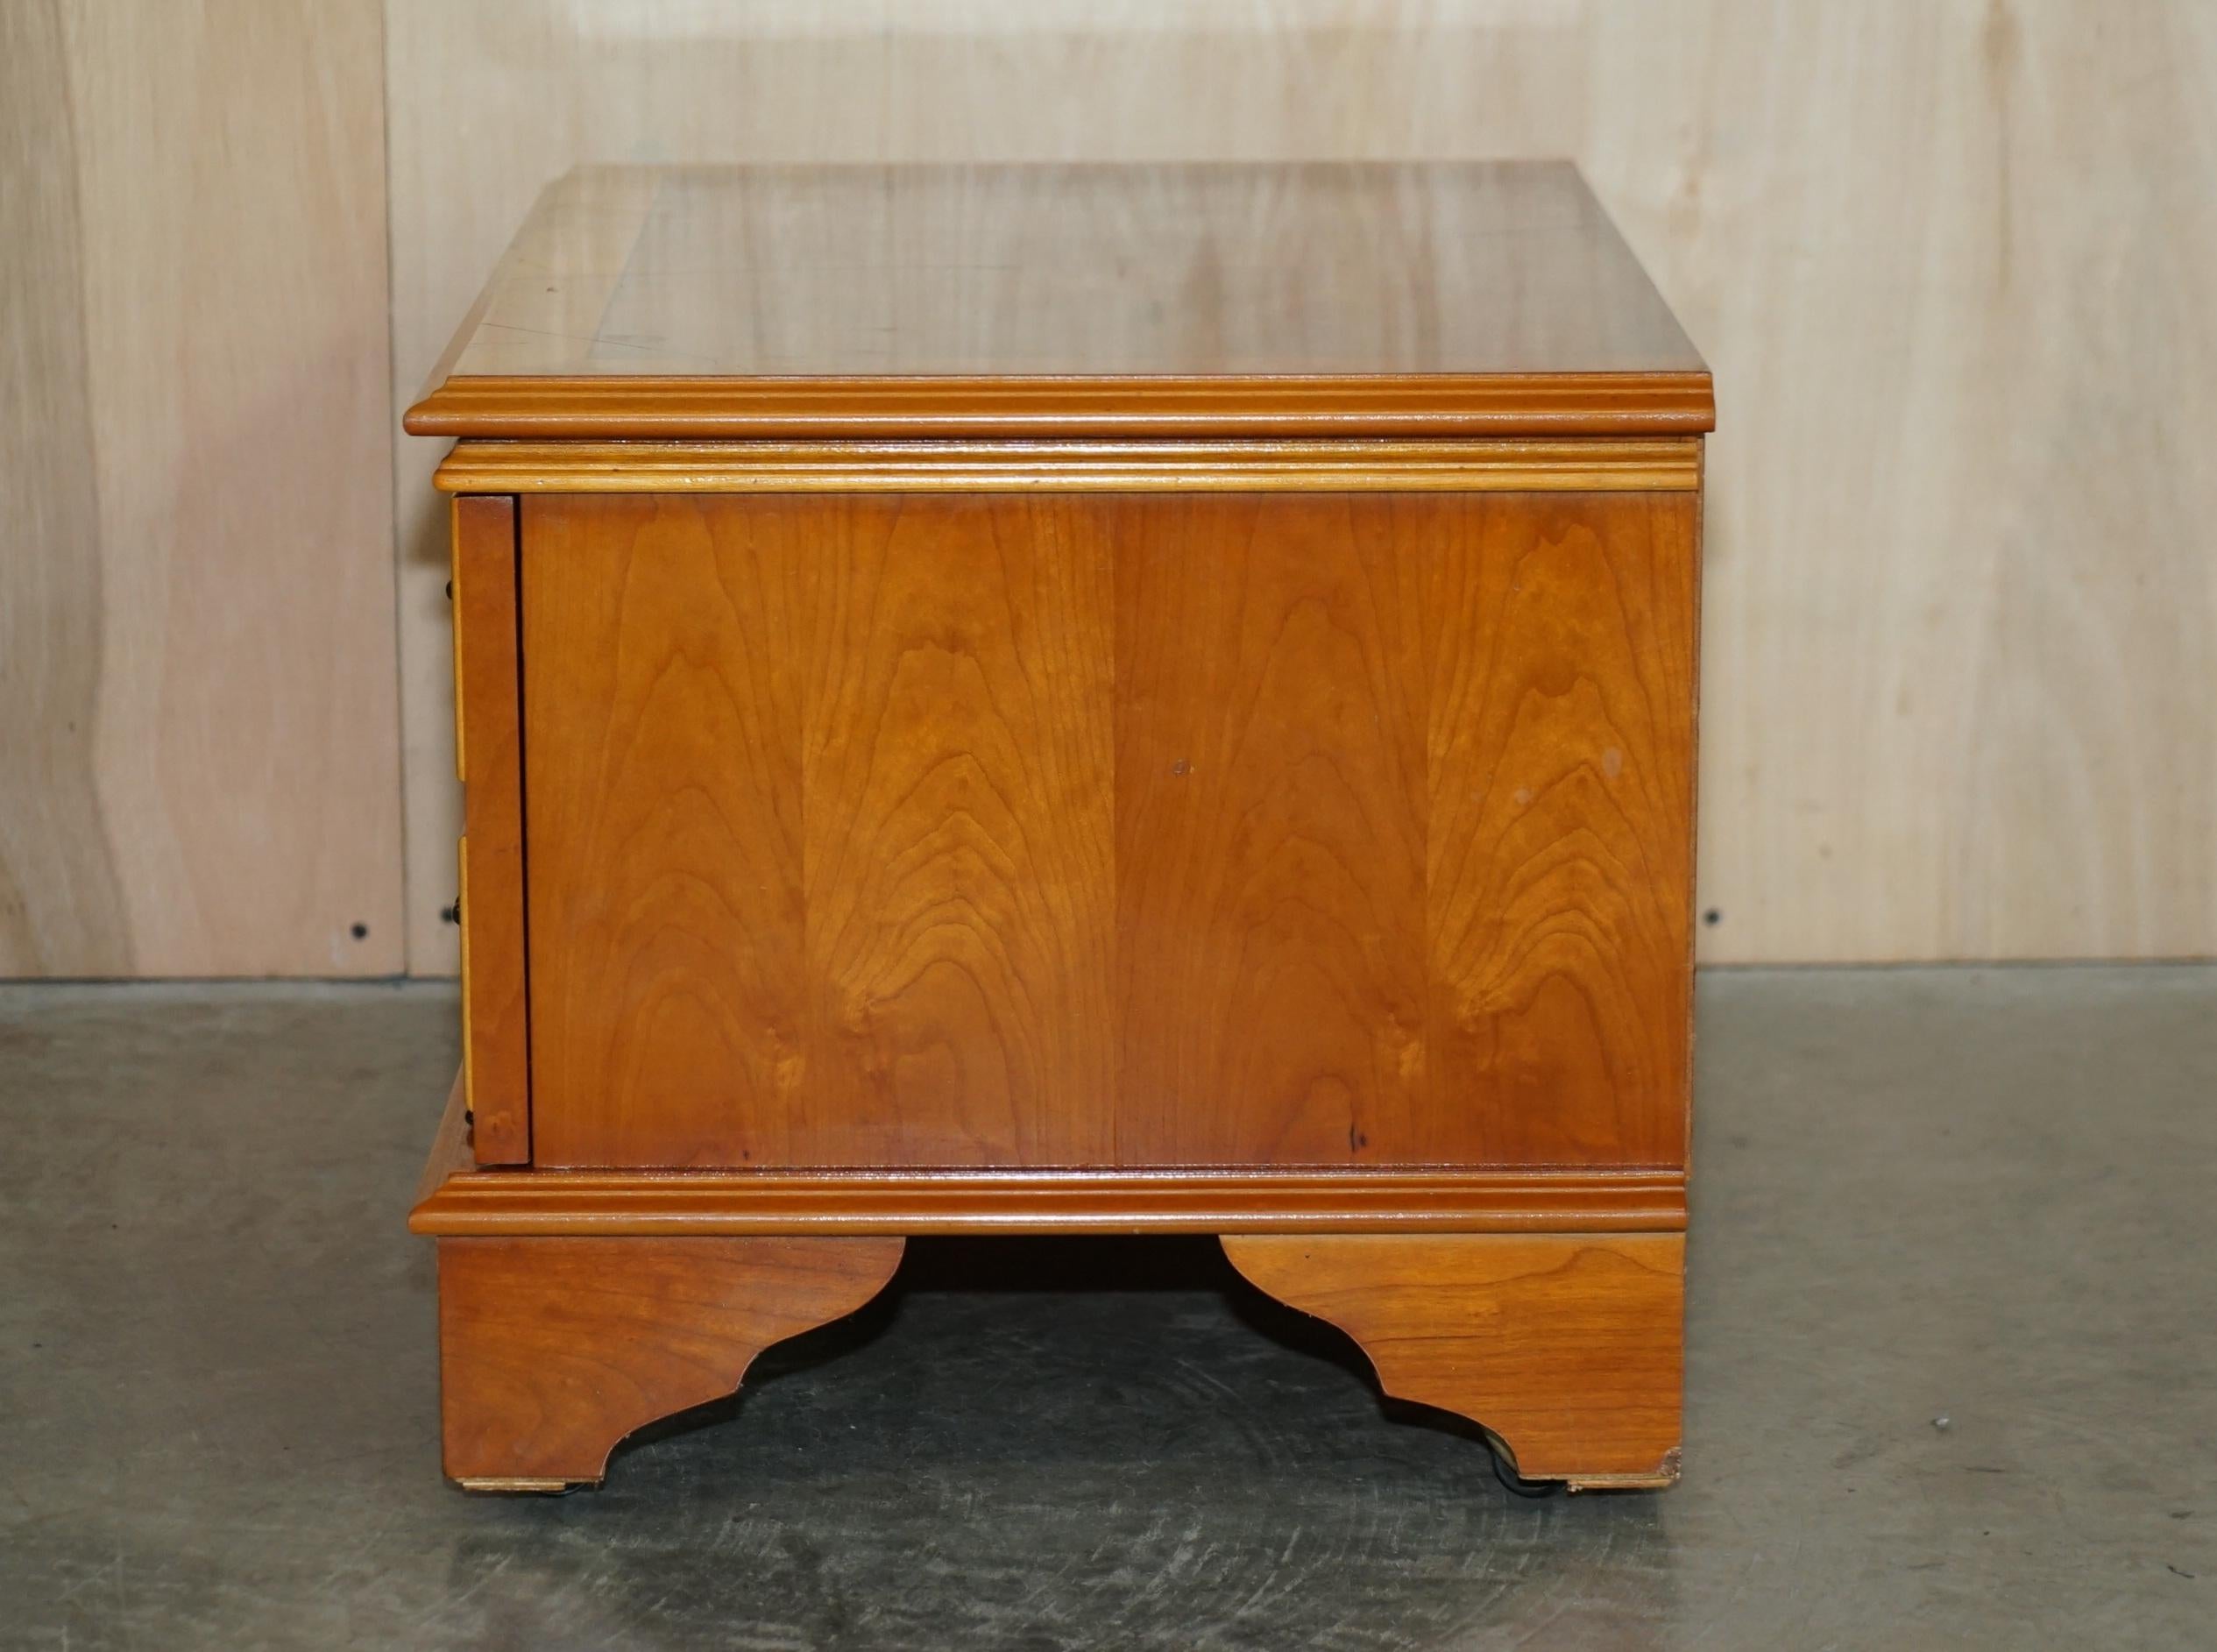 Burr Yew Wood Drop Front Media Television Stand Designed to Hide Sky Boxes Etc For Sale 9